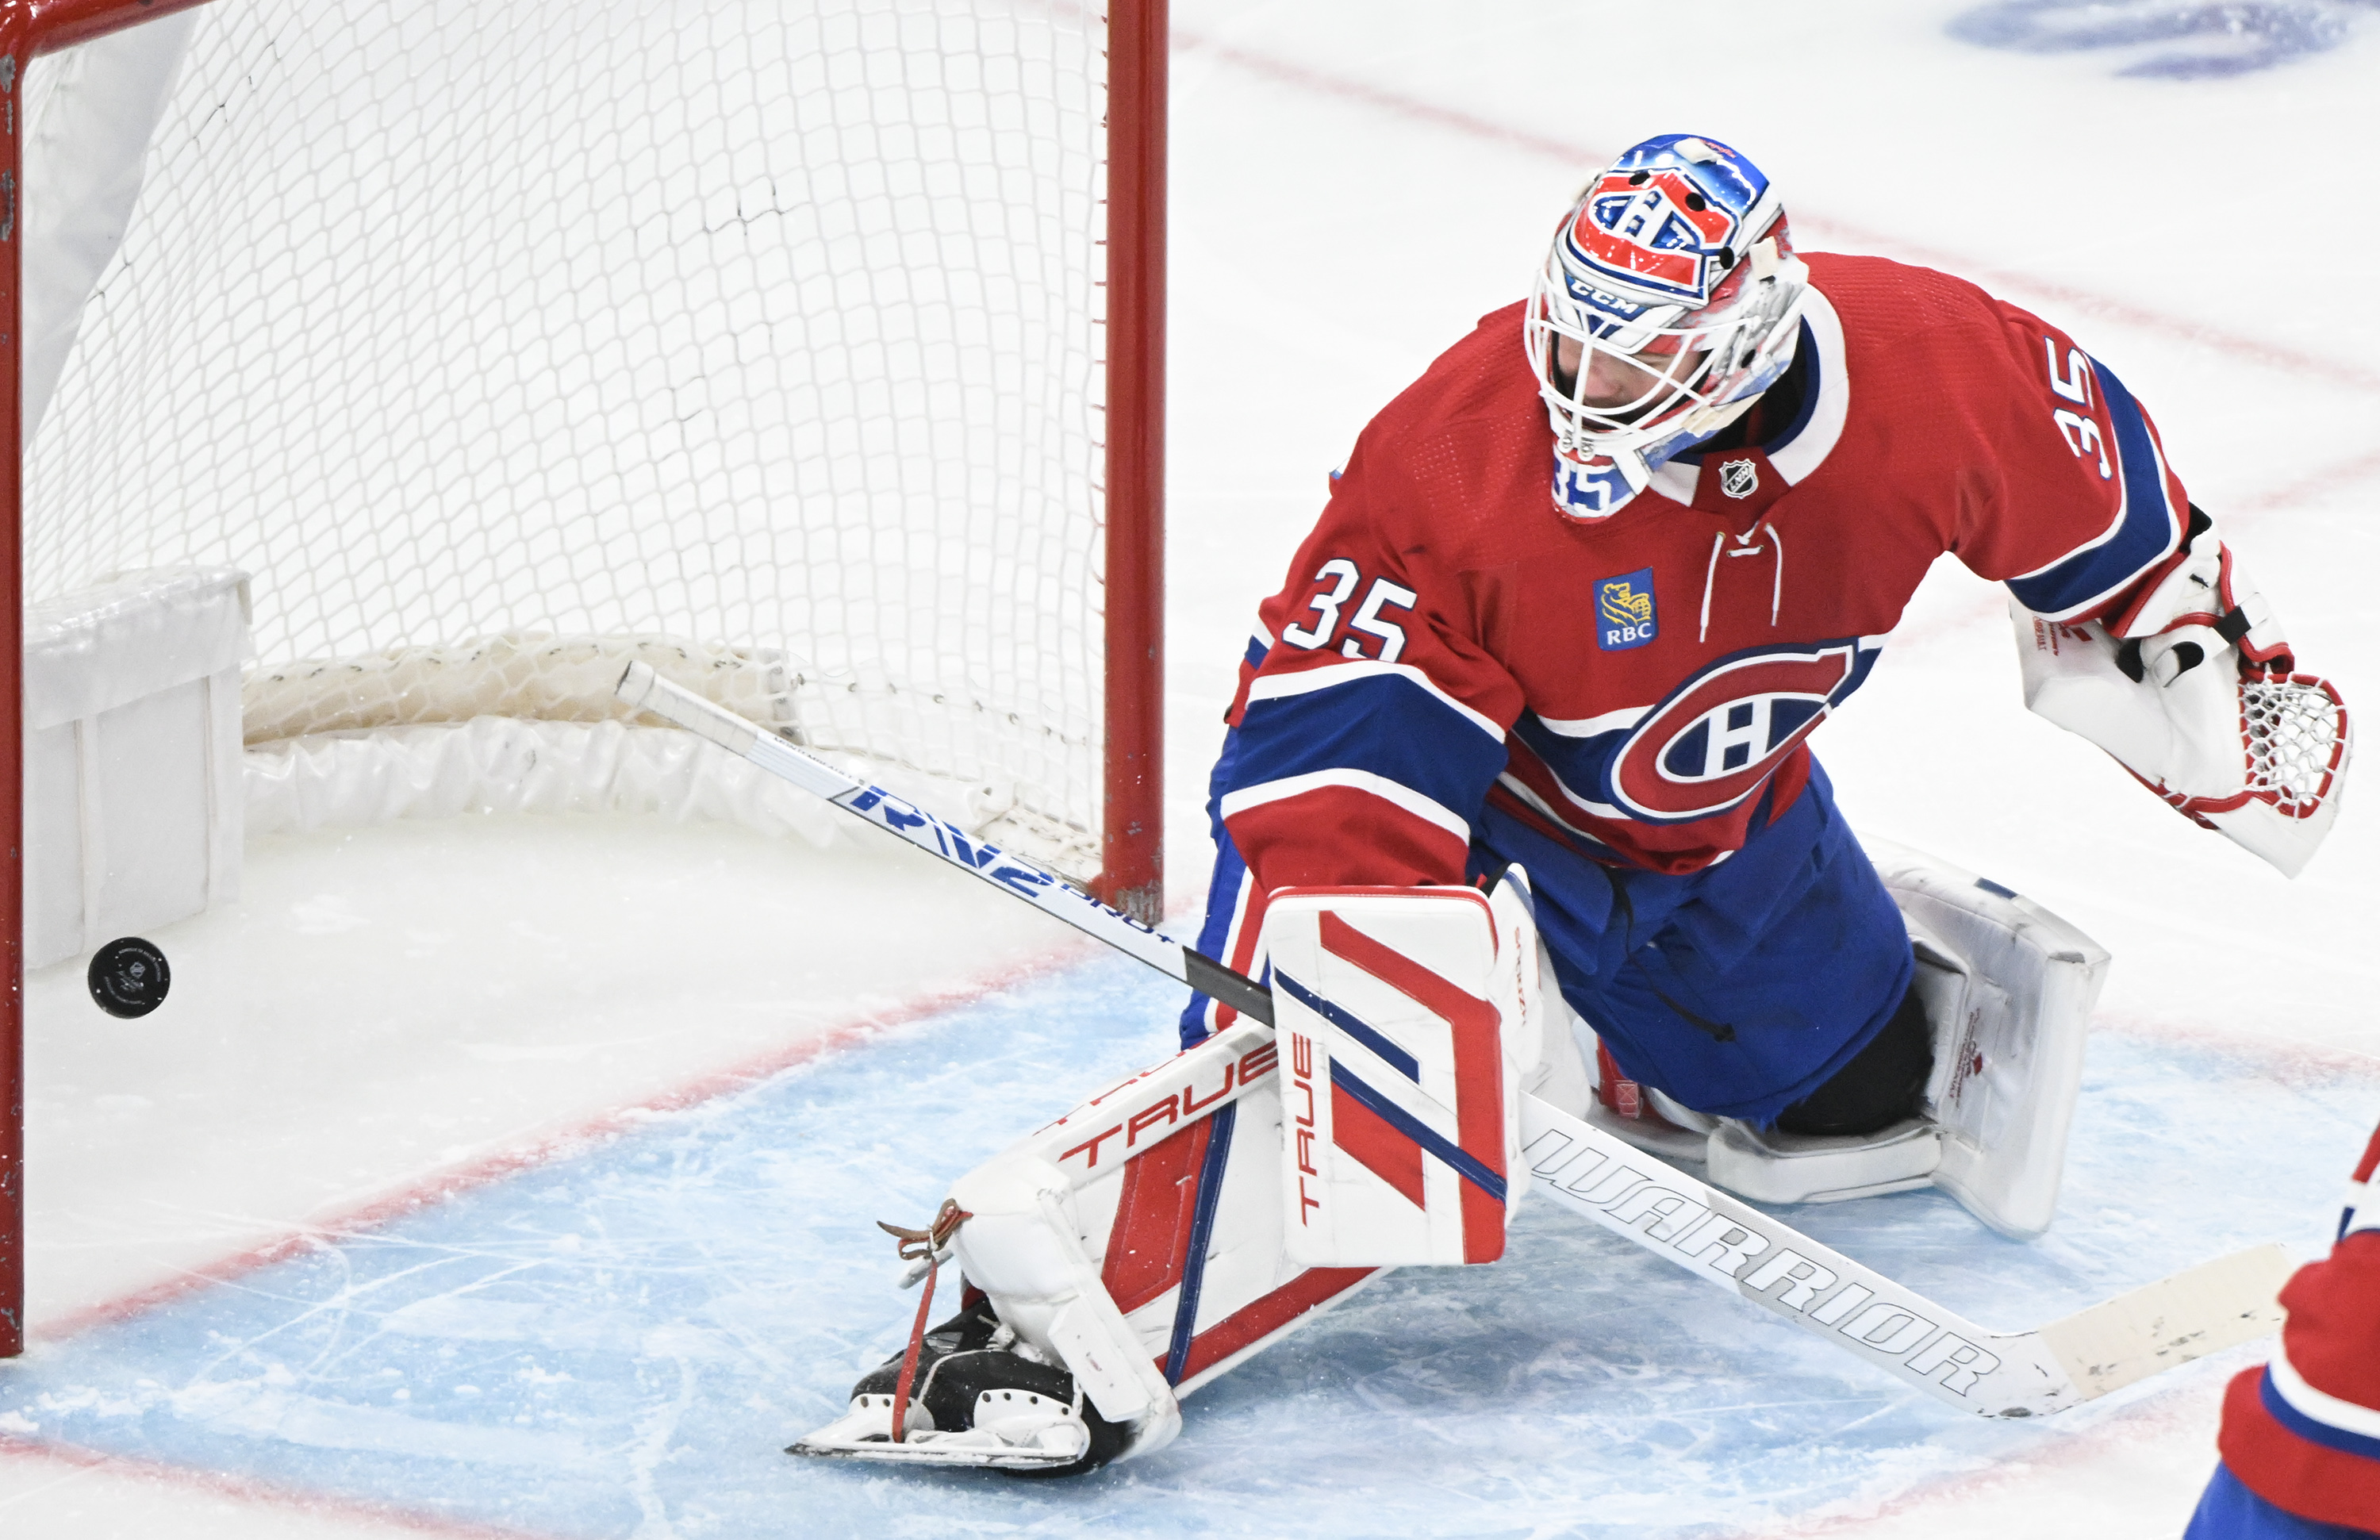 Call of the Wilde: Montreal Canadiens miss an opportunity with 2-1 loss to Flames